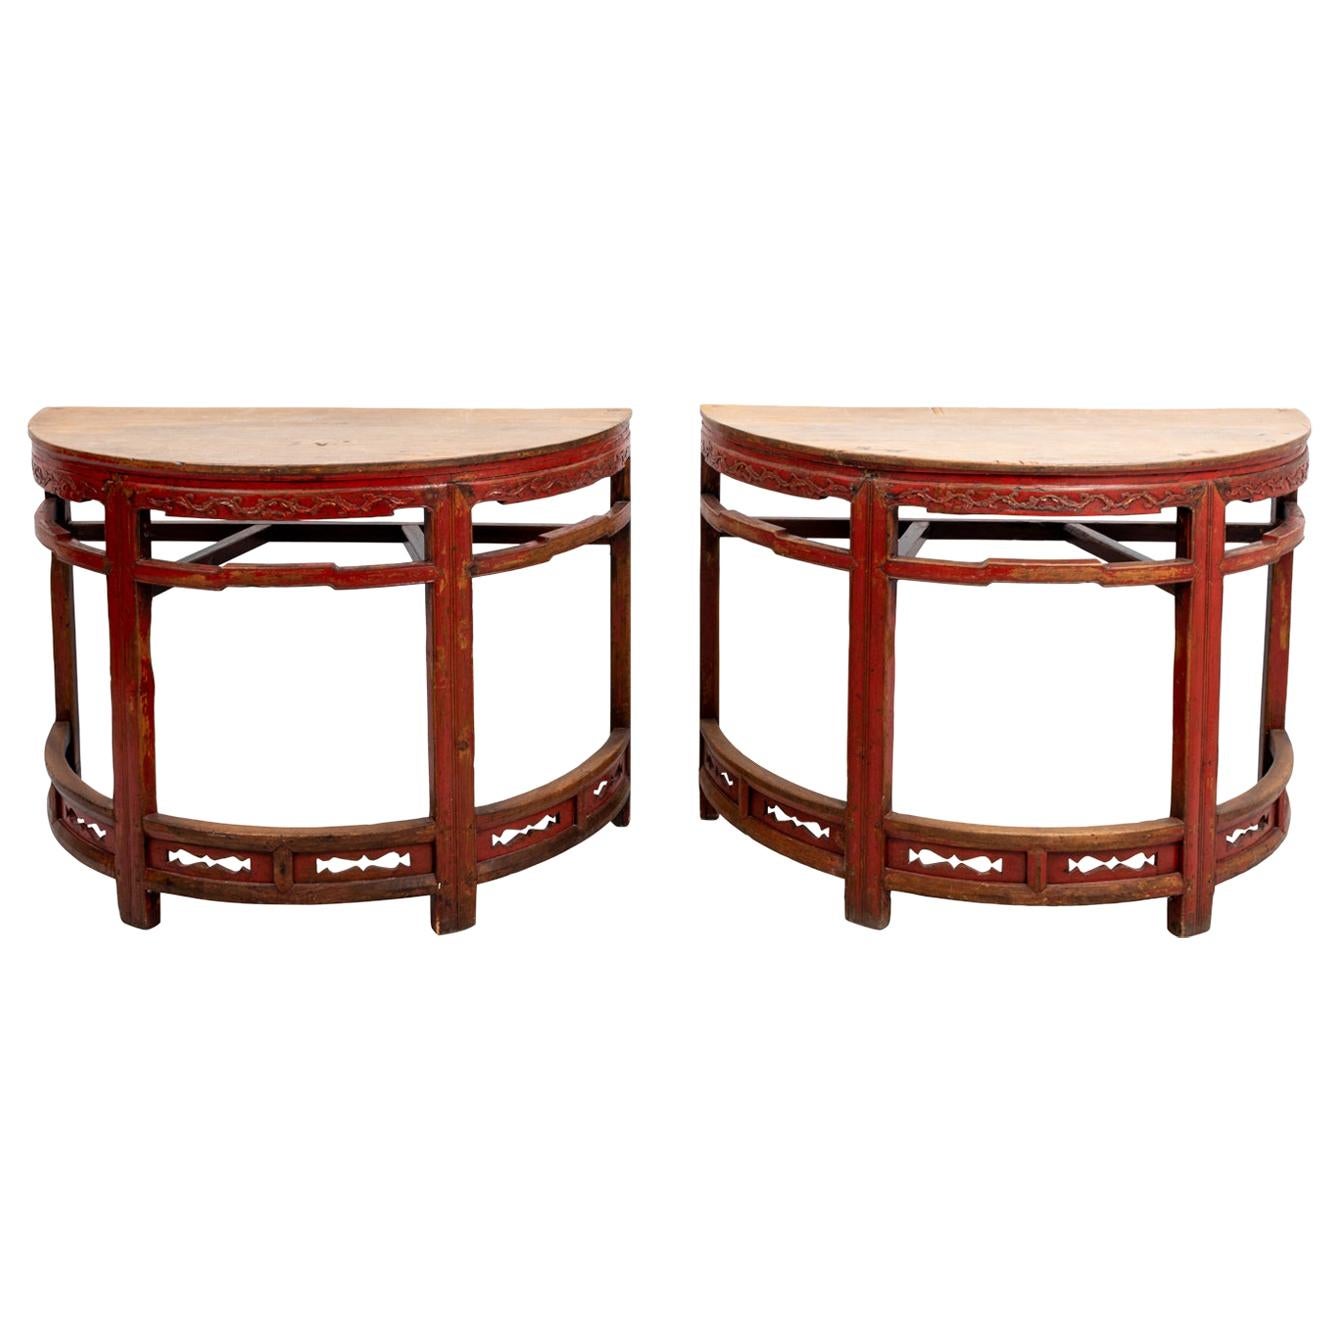 Painted Chinese Demilune Tables